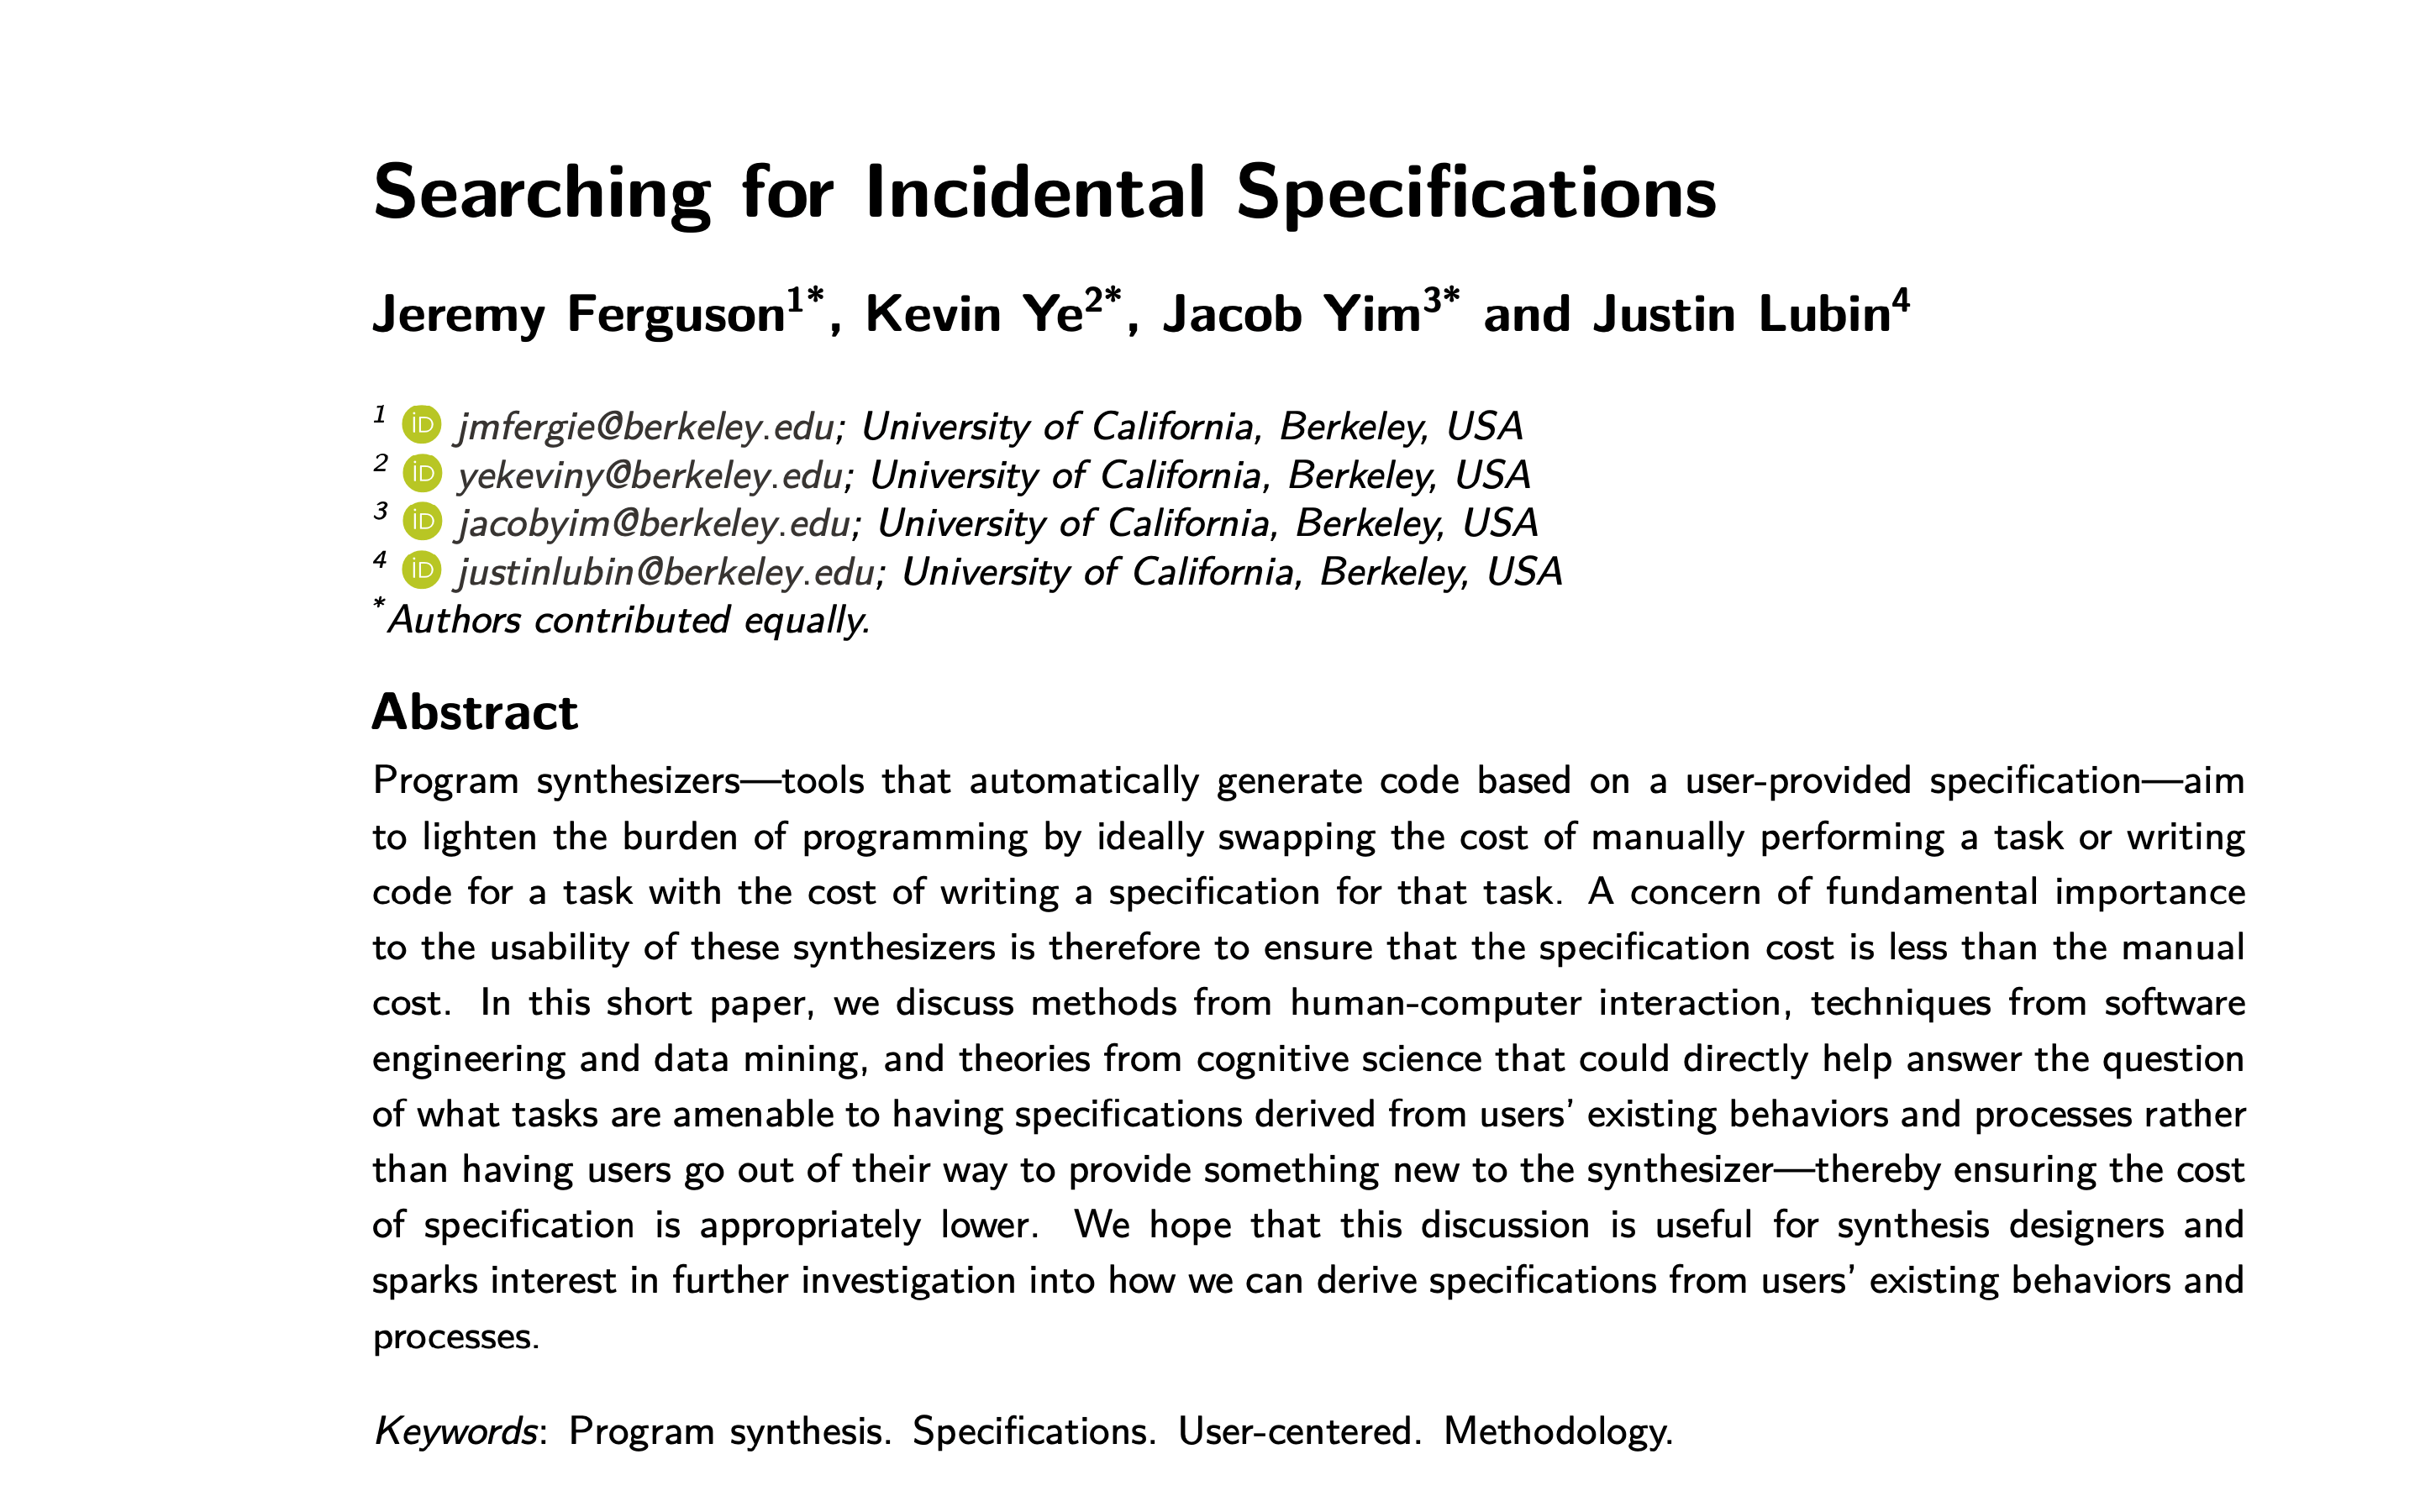 Searching for Incidental Specifications